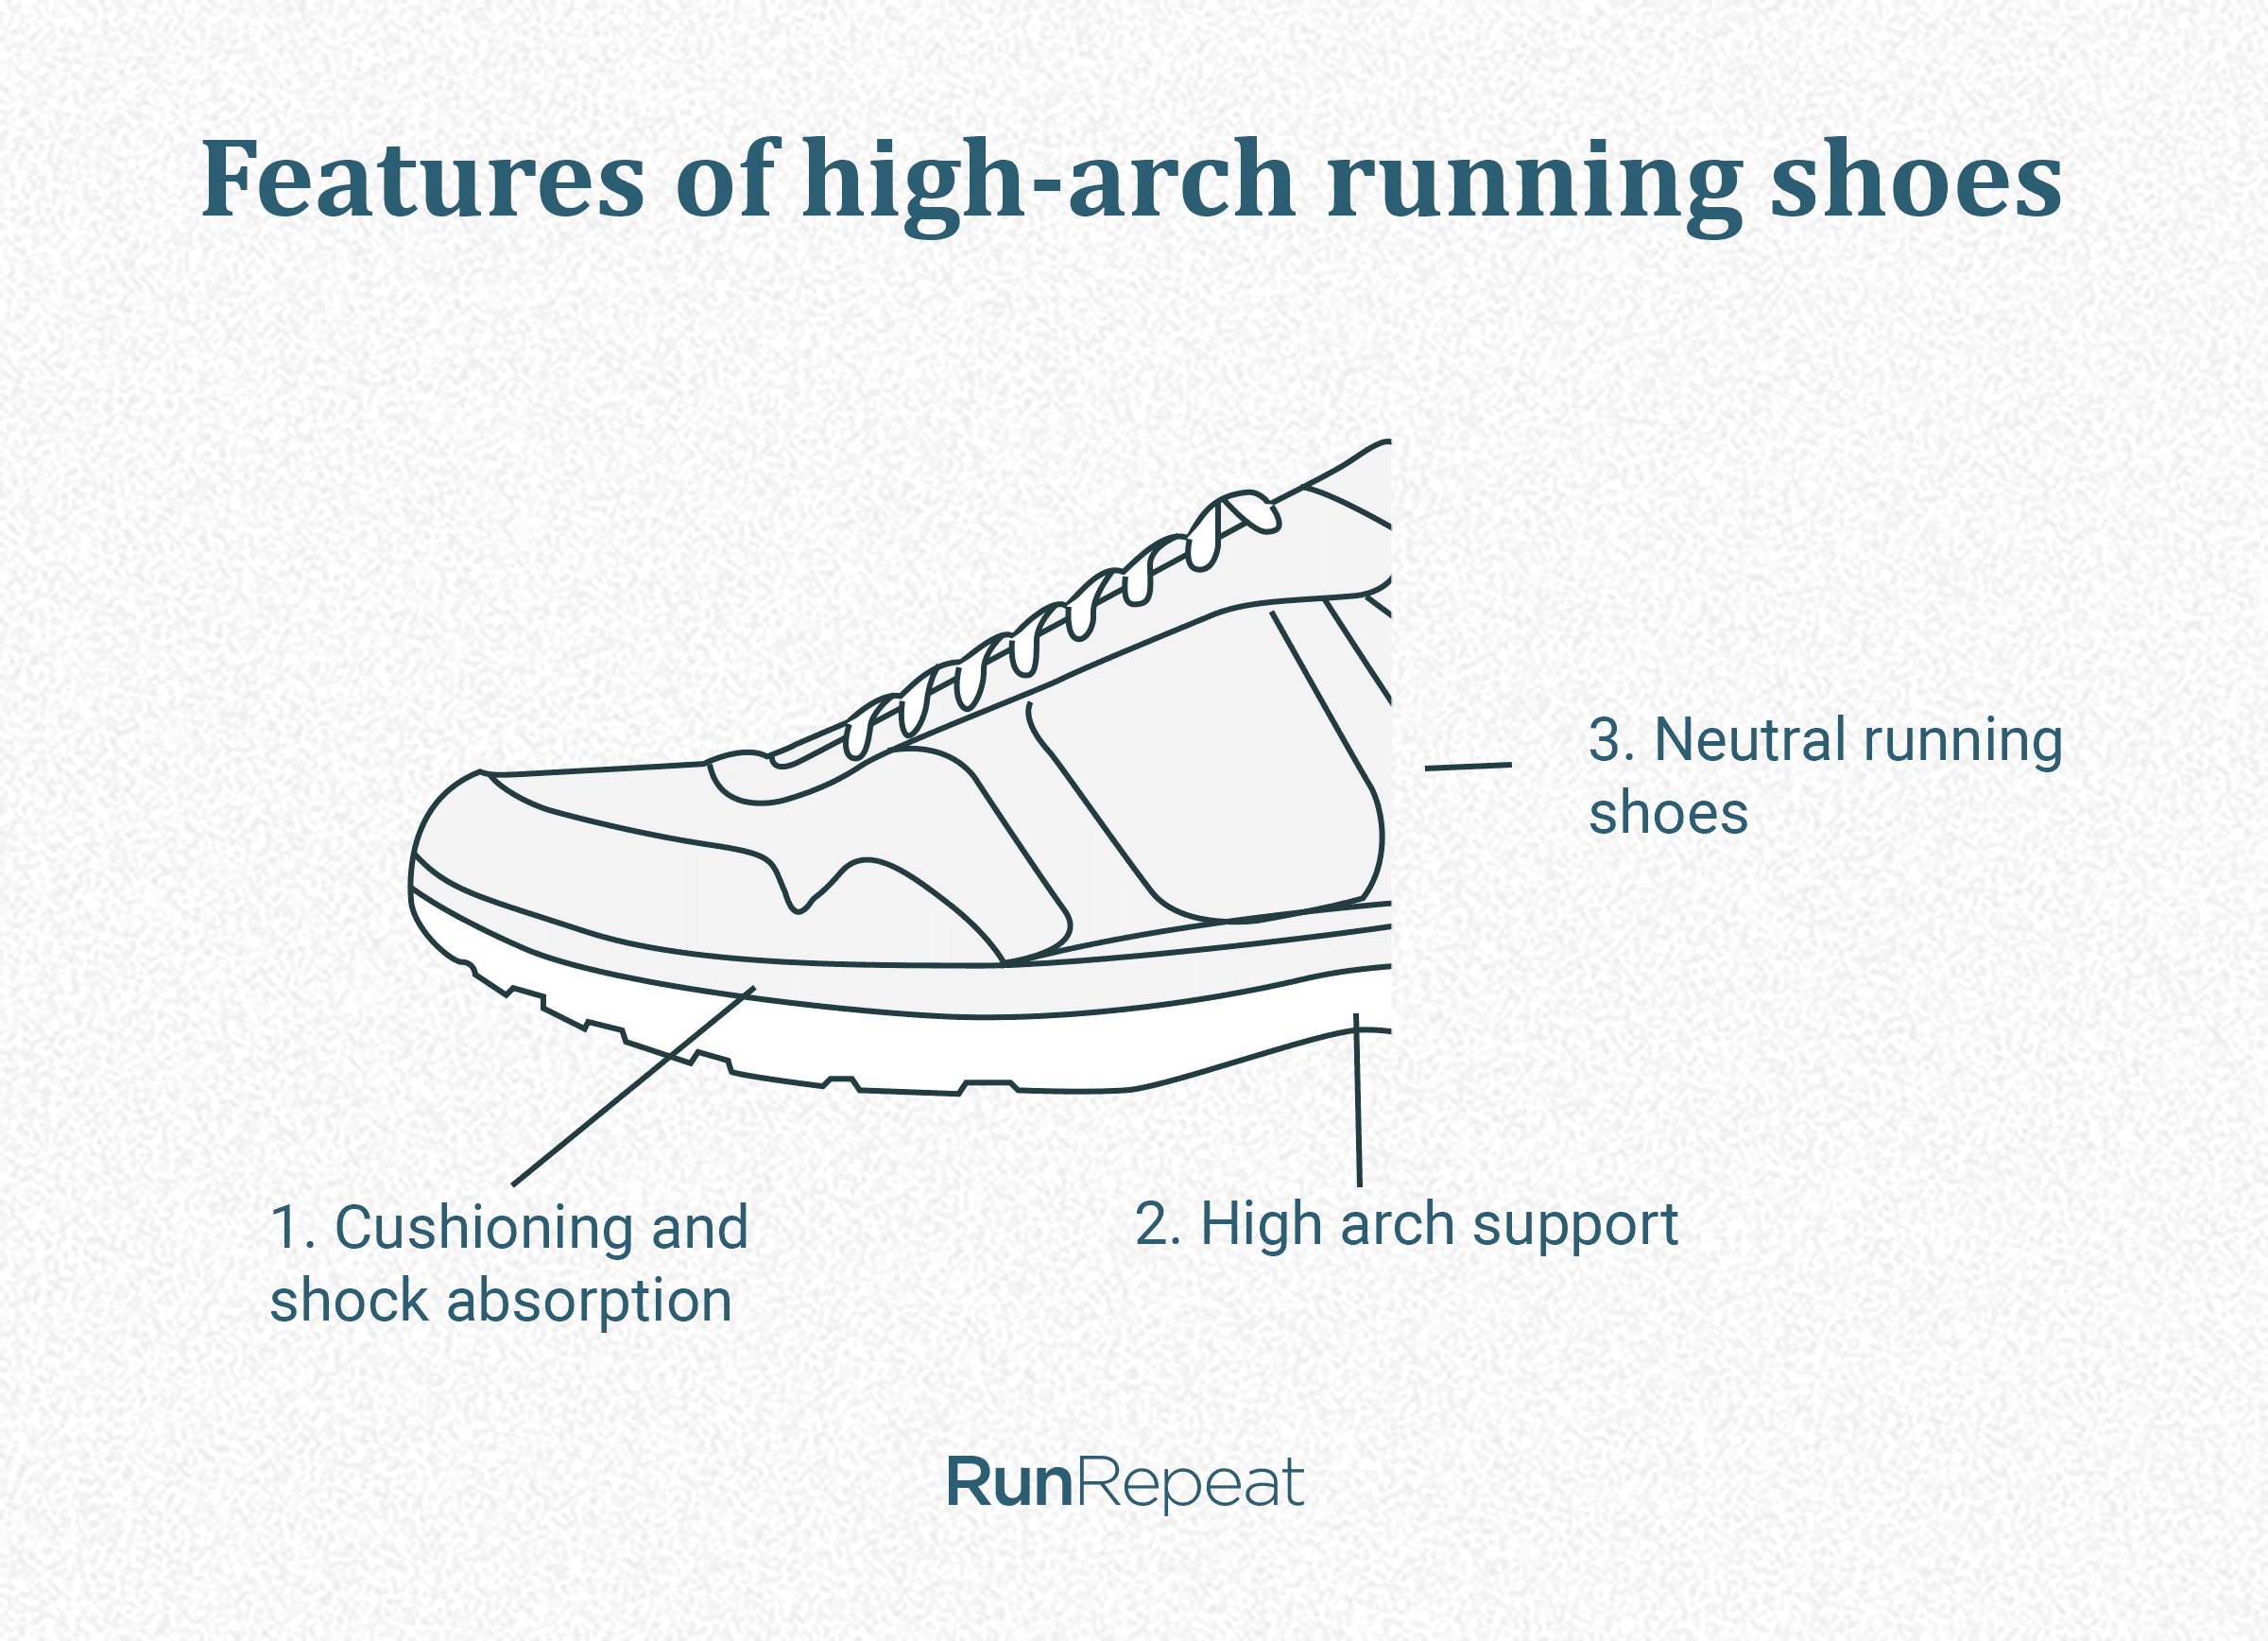 What Is An Arch Support?